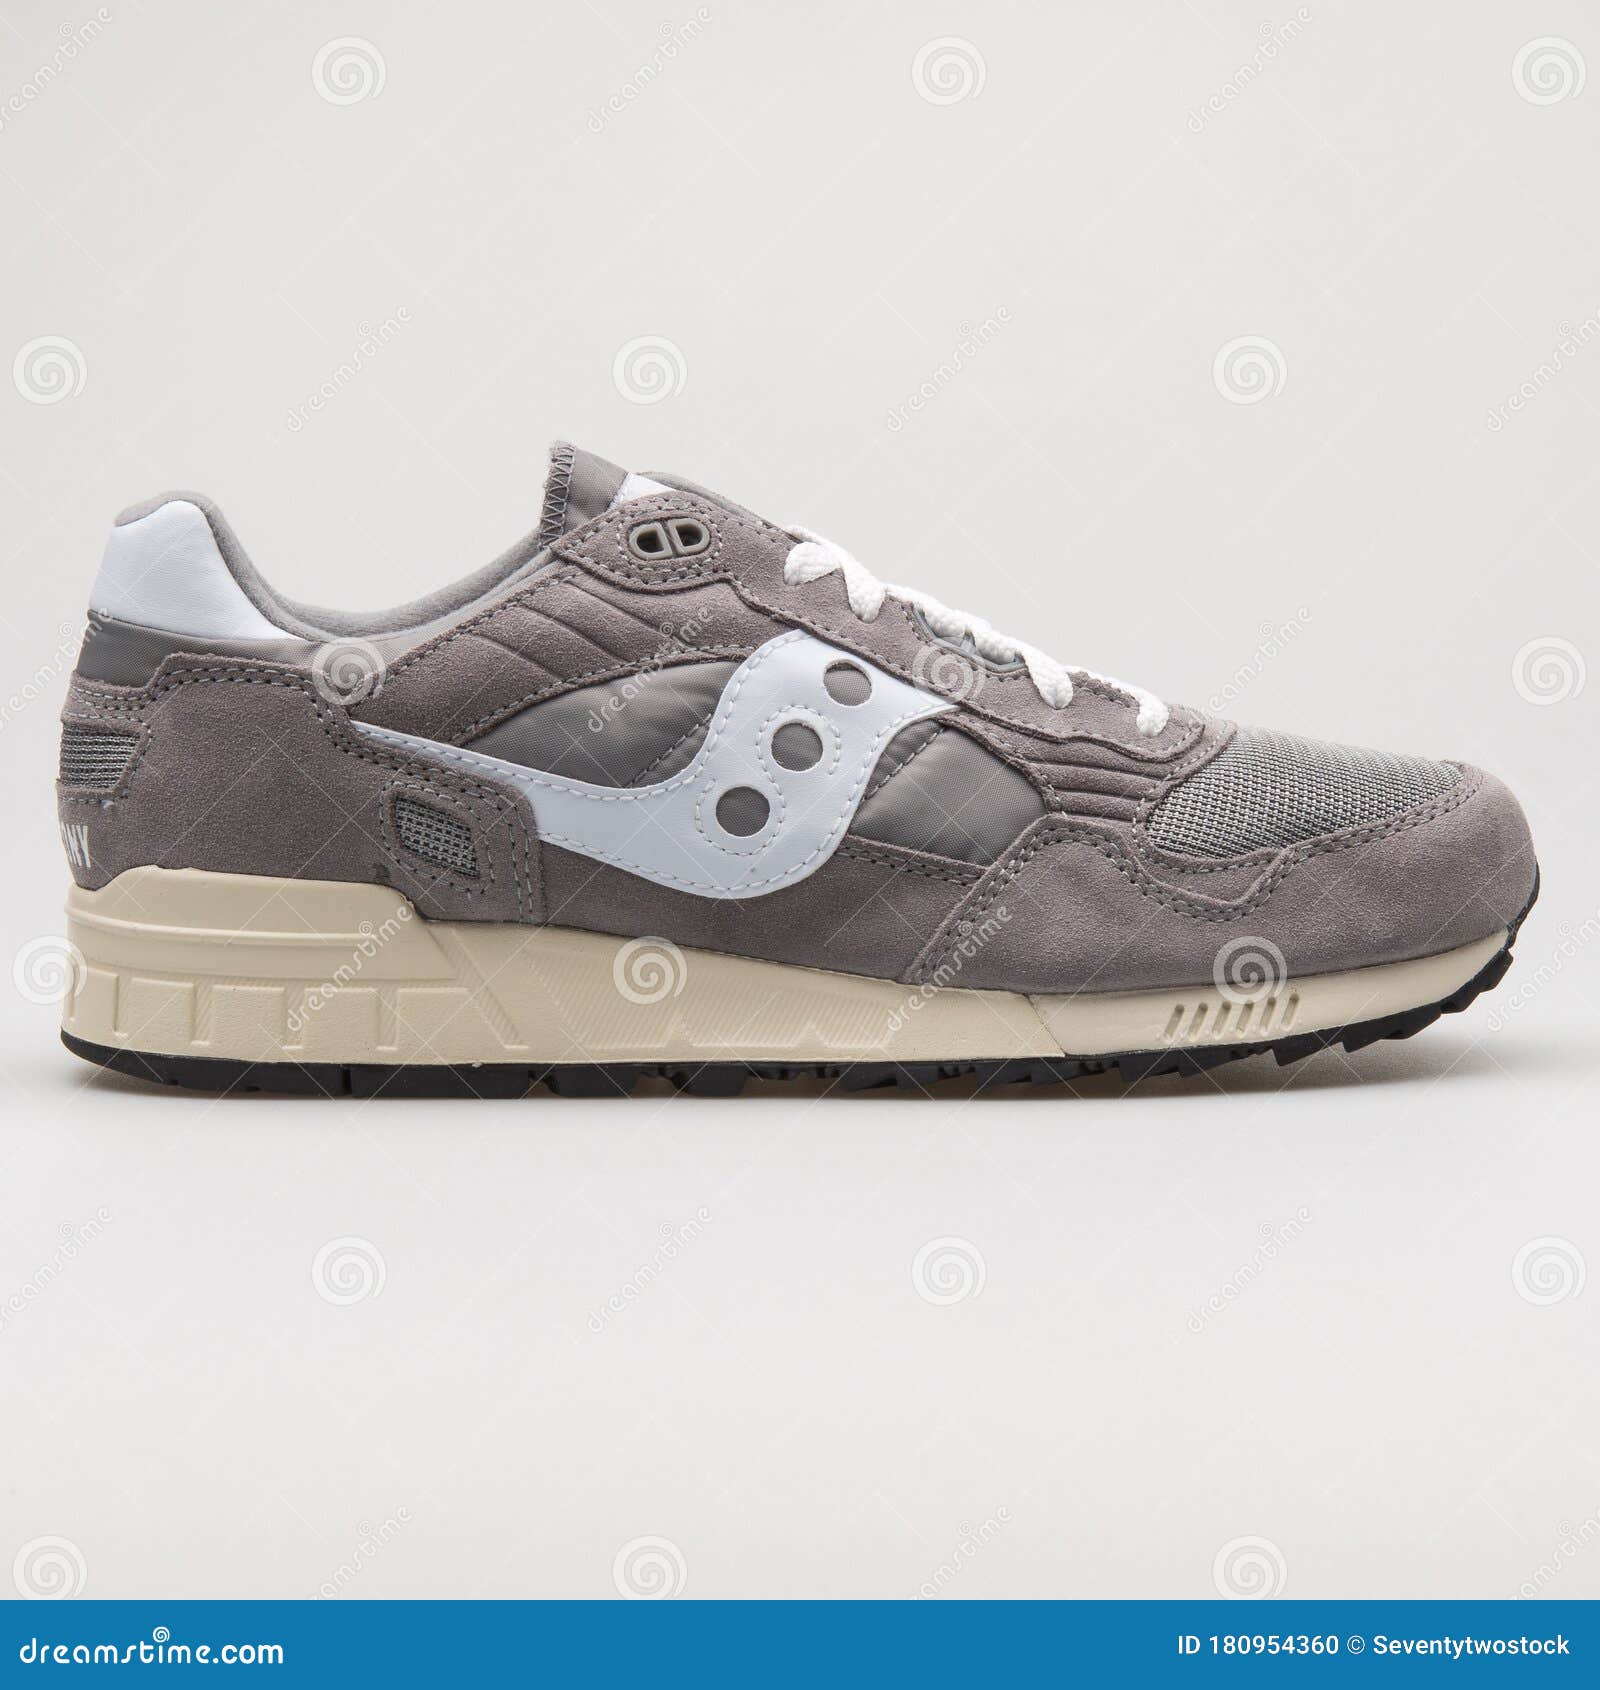 Ark Smitsom sortie Saucony Shadow 5000 Vintage Grey Sneaker Editorial Image - Image of  isolated, lifestyle: 180954360